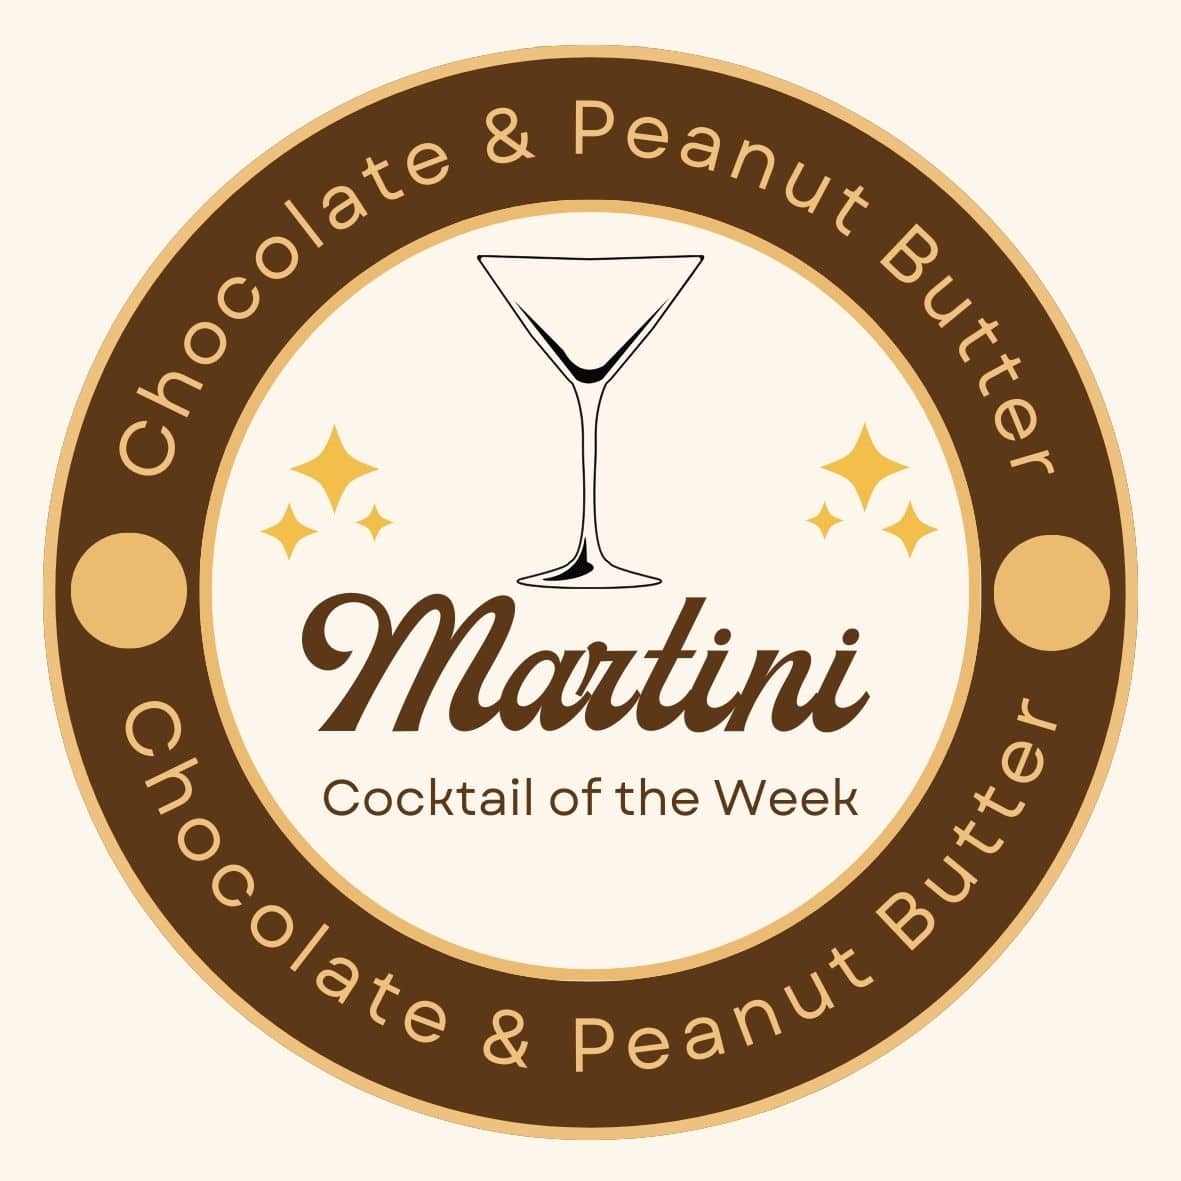 The cocktail of the week at Hemauer Brewing Co is the chocolate and peanut butter martini.